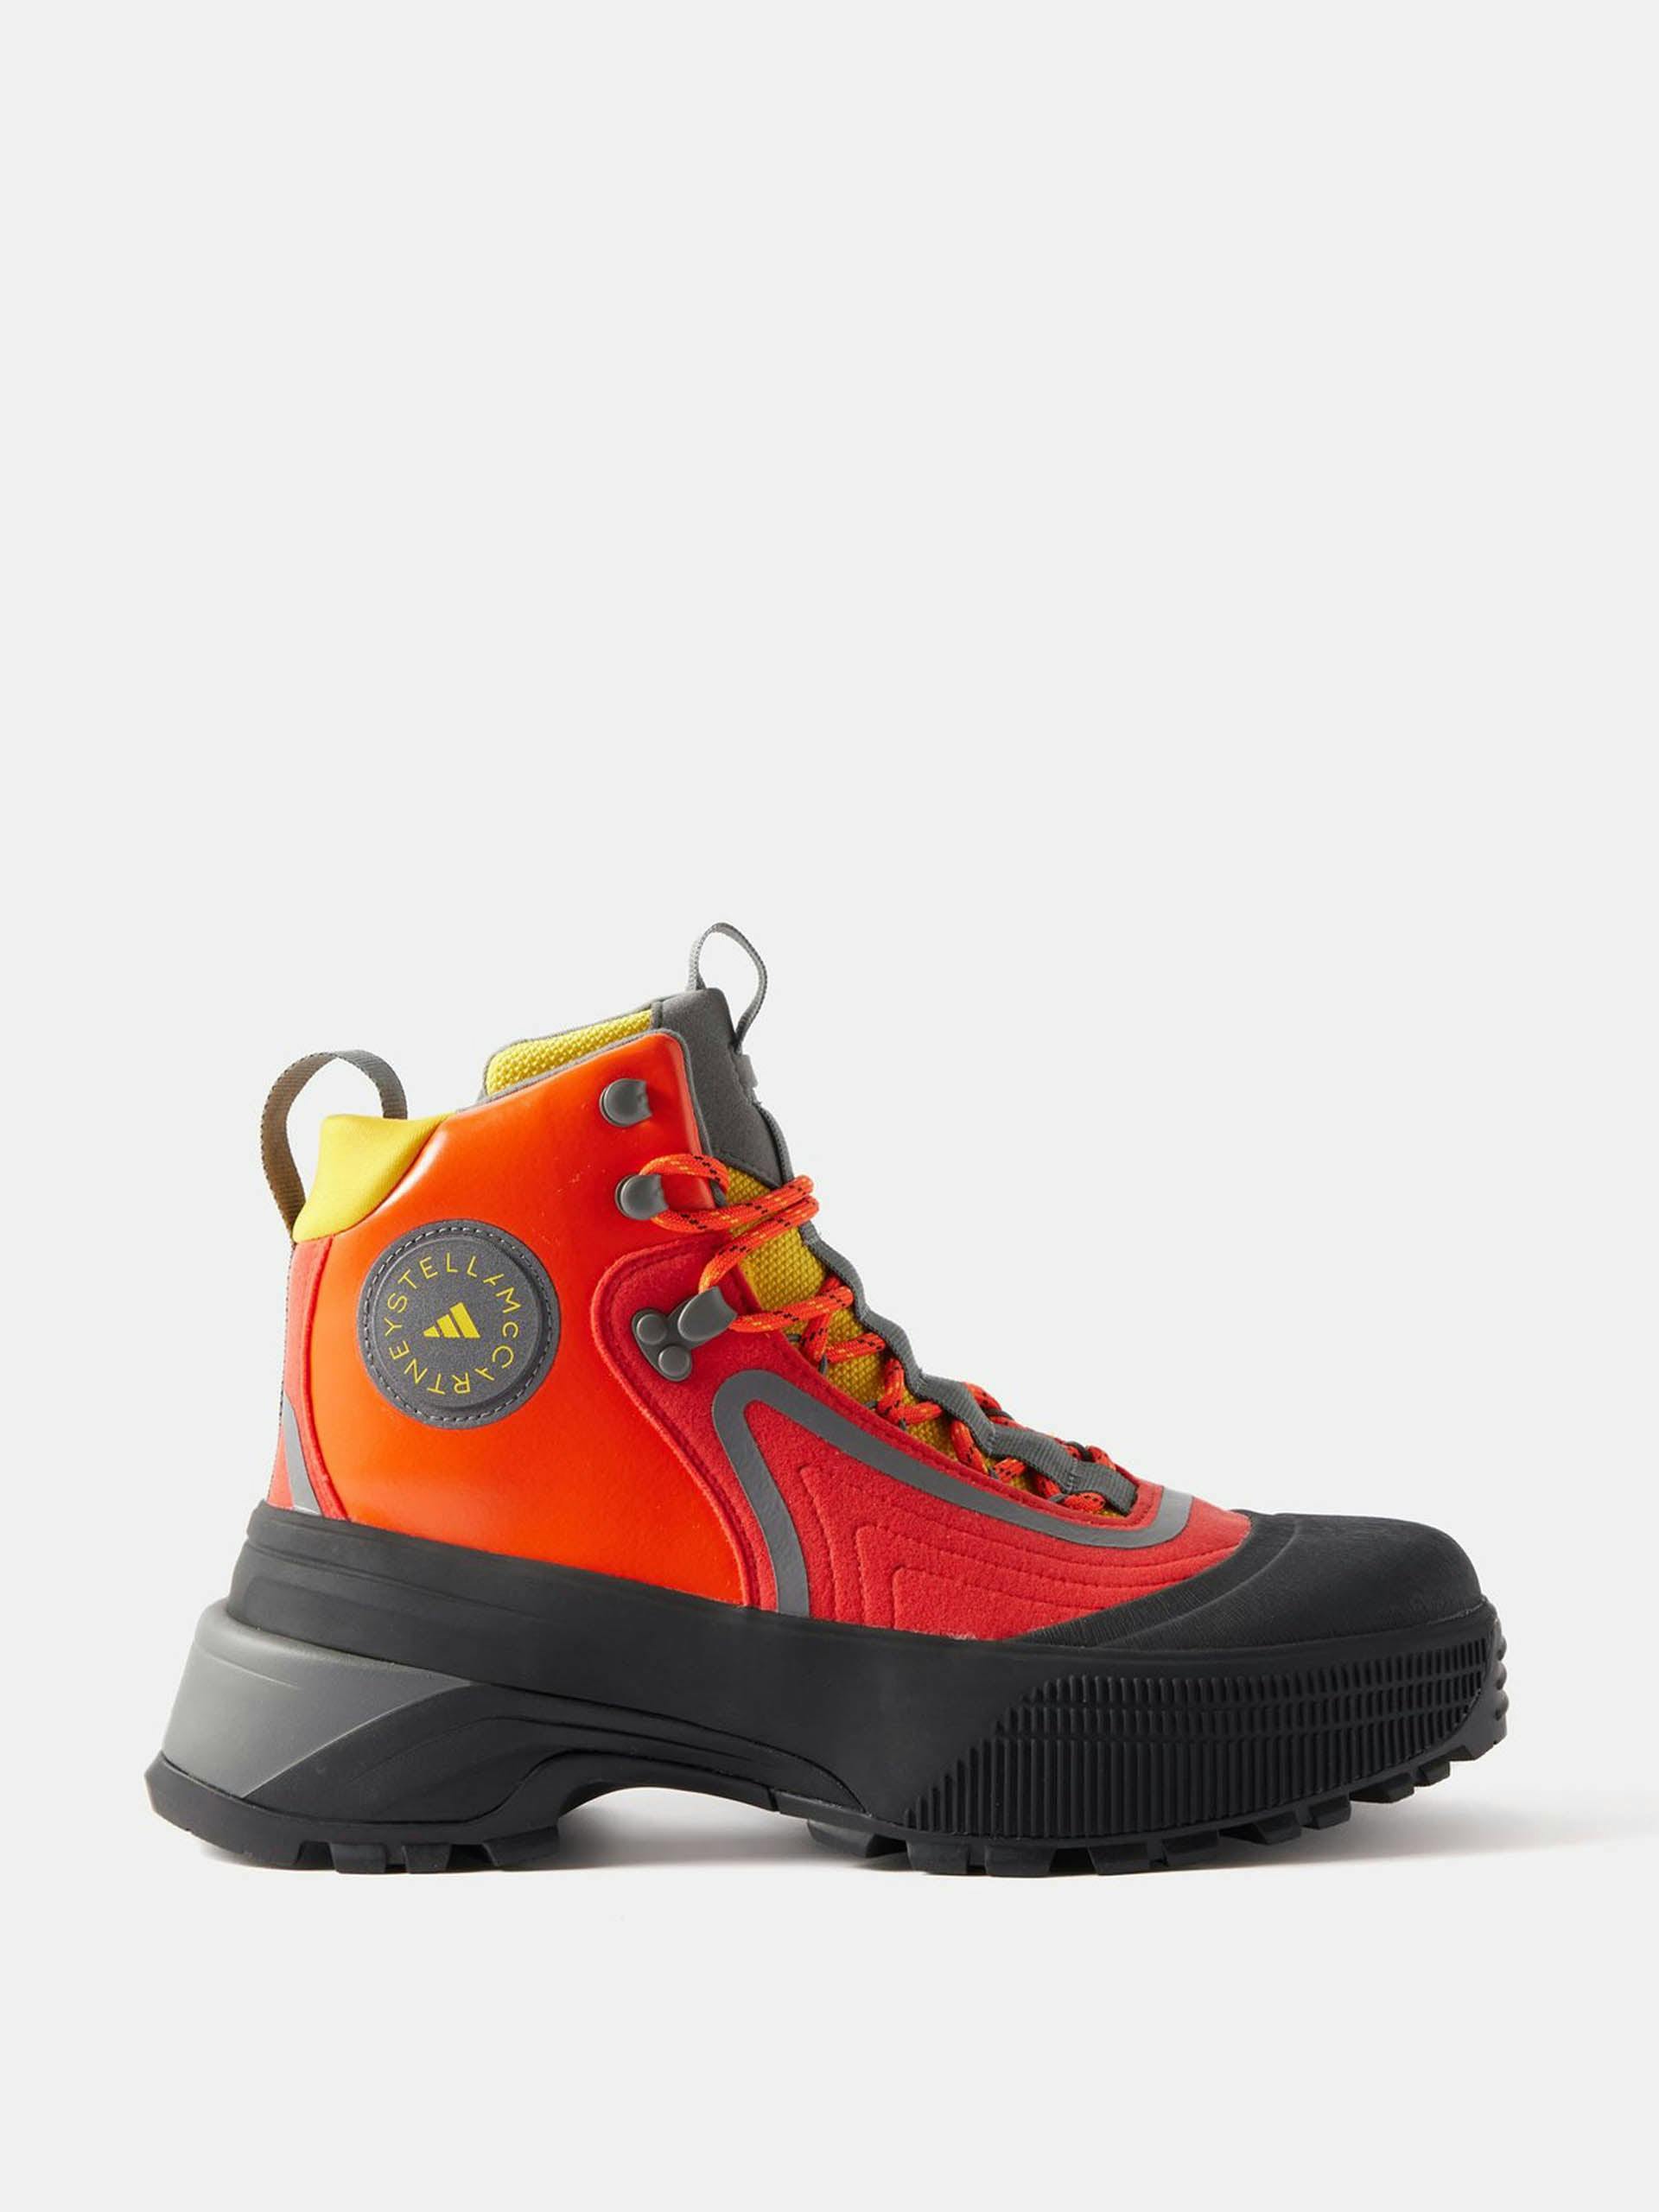 Red and orange rubber hiking boots